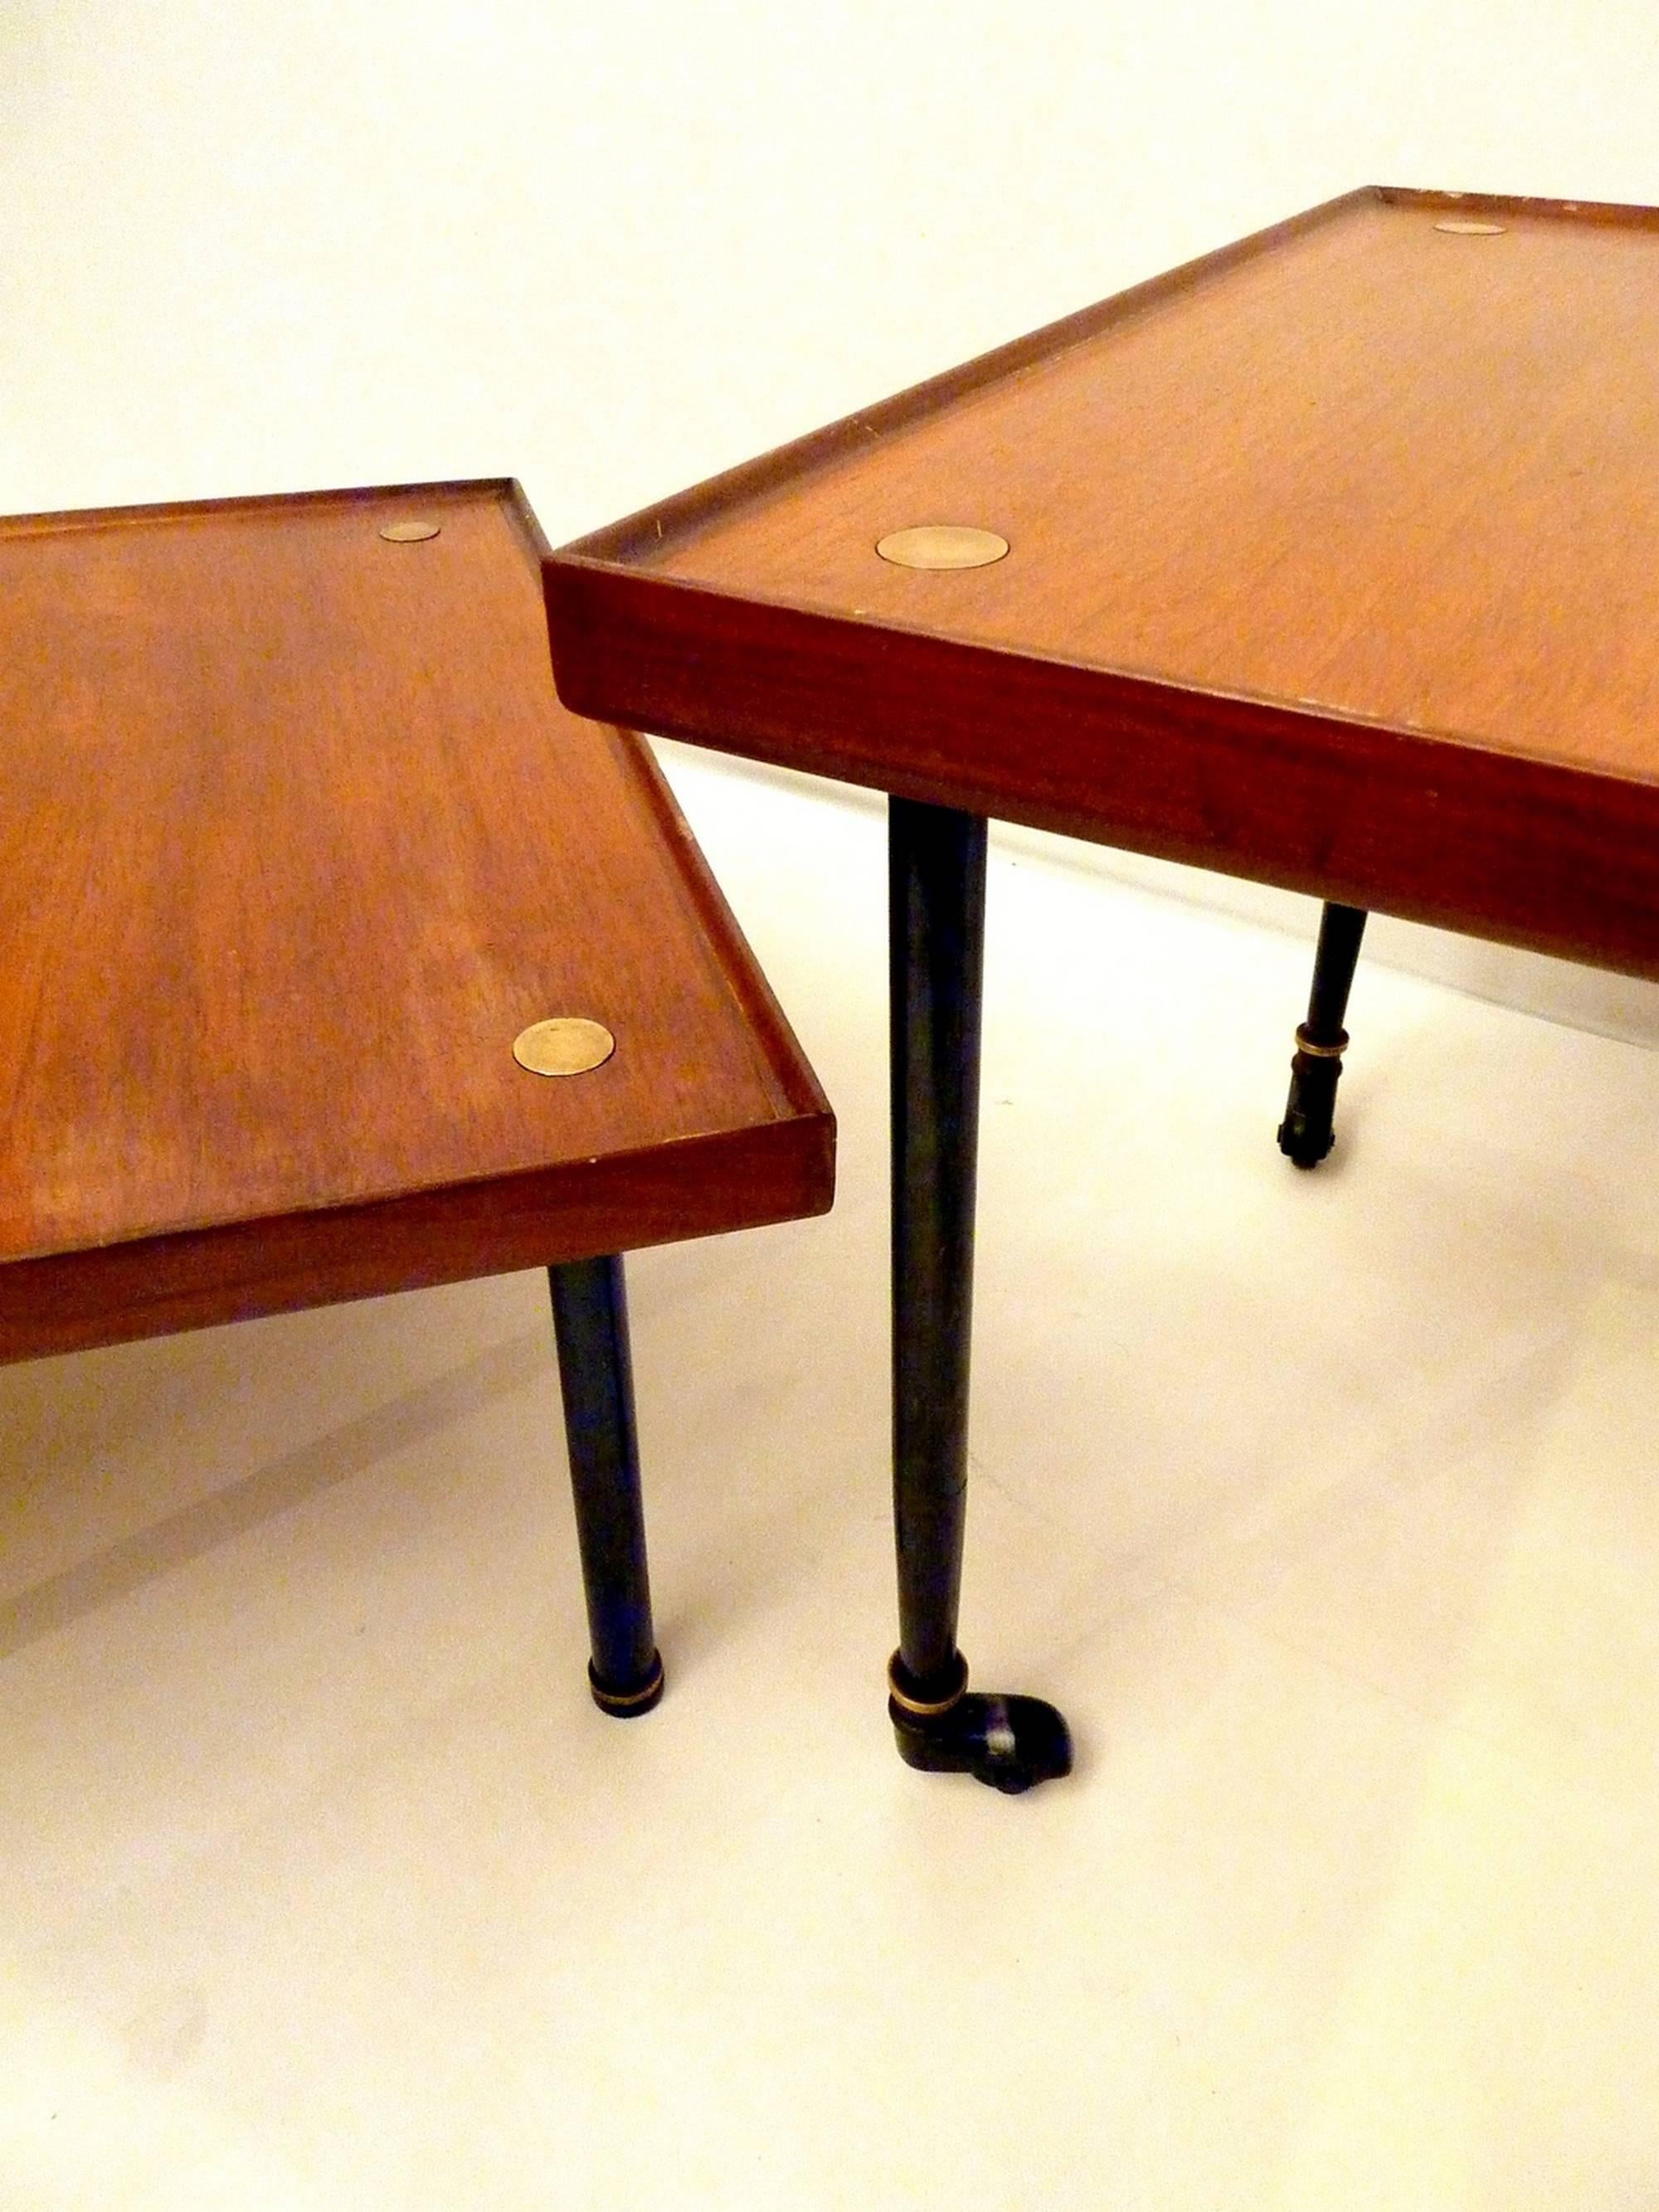 A pair of rarely seen Melchiorre Bega side tables in teak and brass. Produced by Klan, Italy. The tables are executed in two different manners. One has wheels and is higher than the other without wheels. One table is 50cm high and the other is 33cm